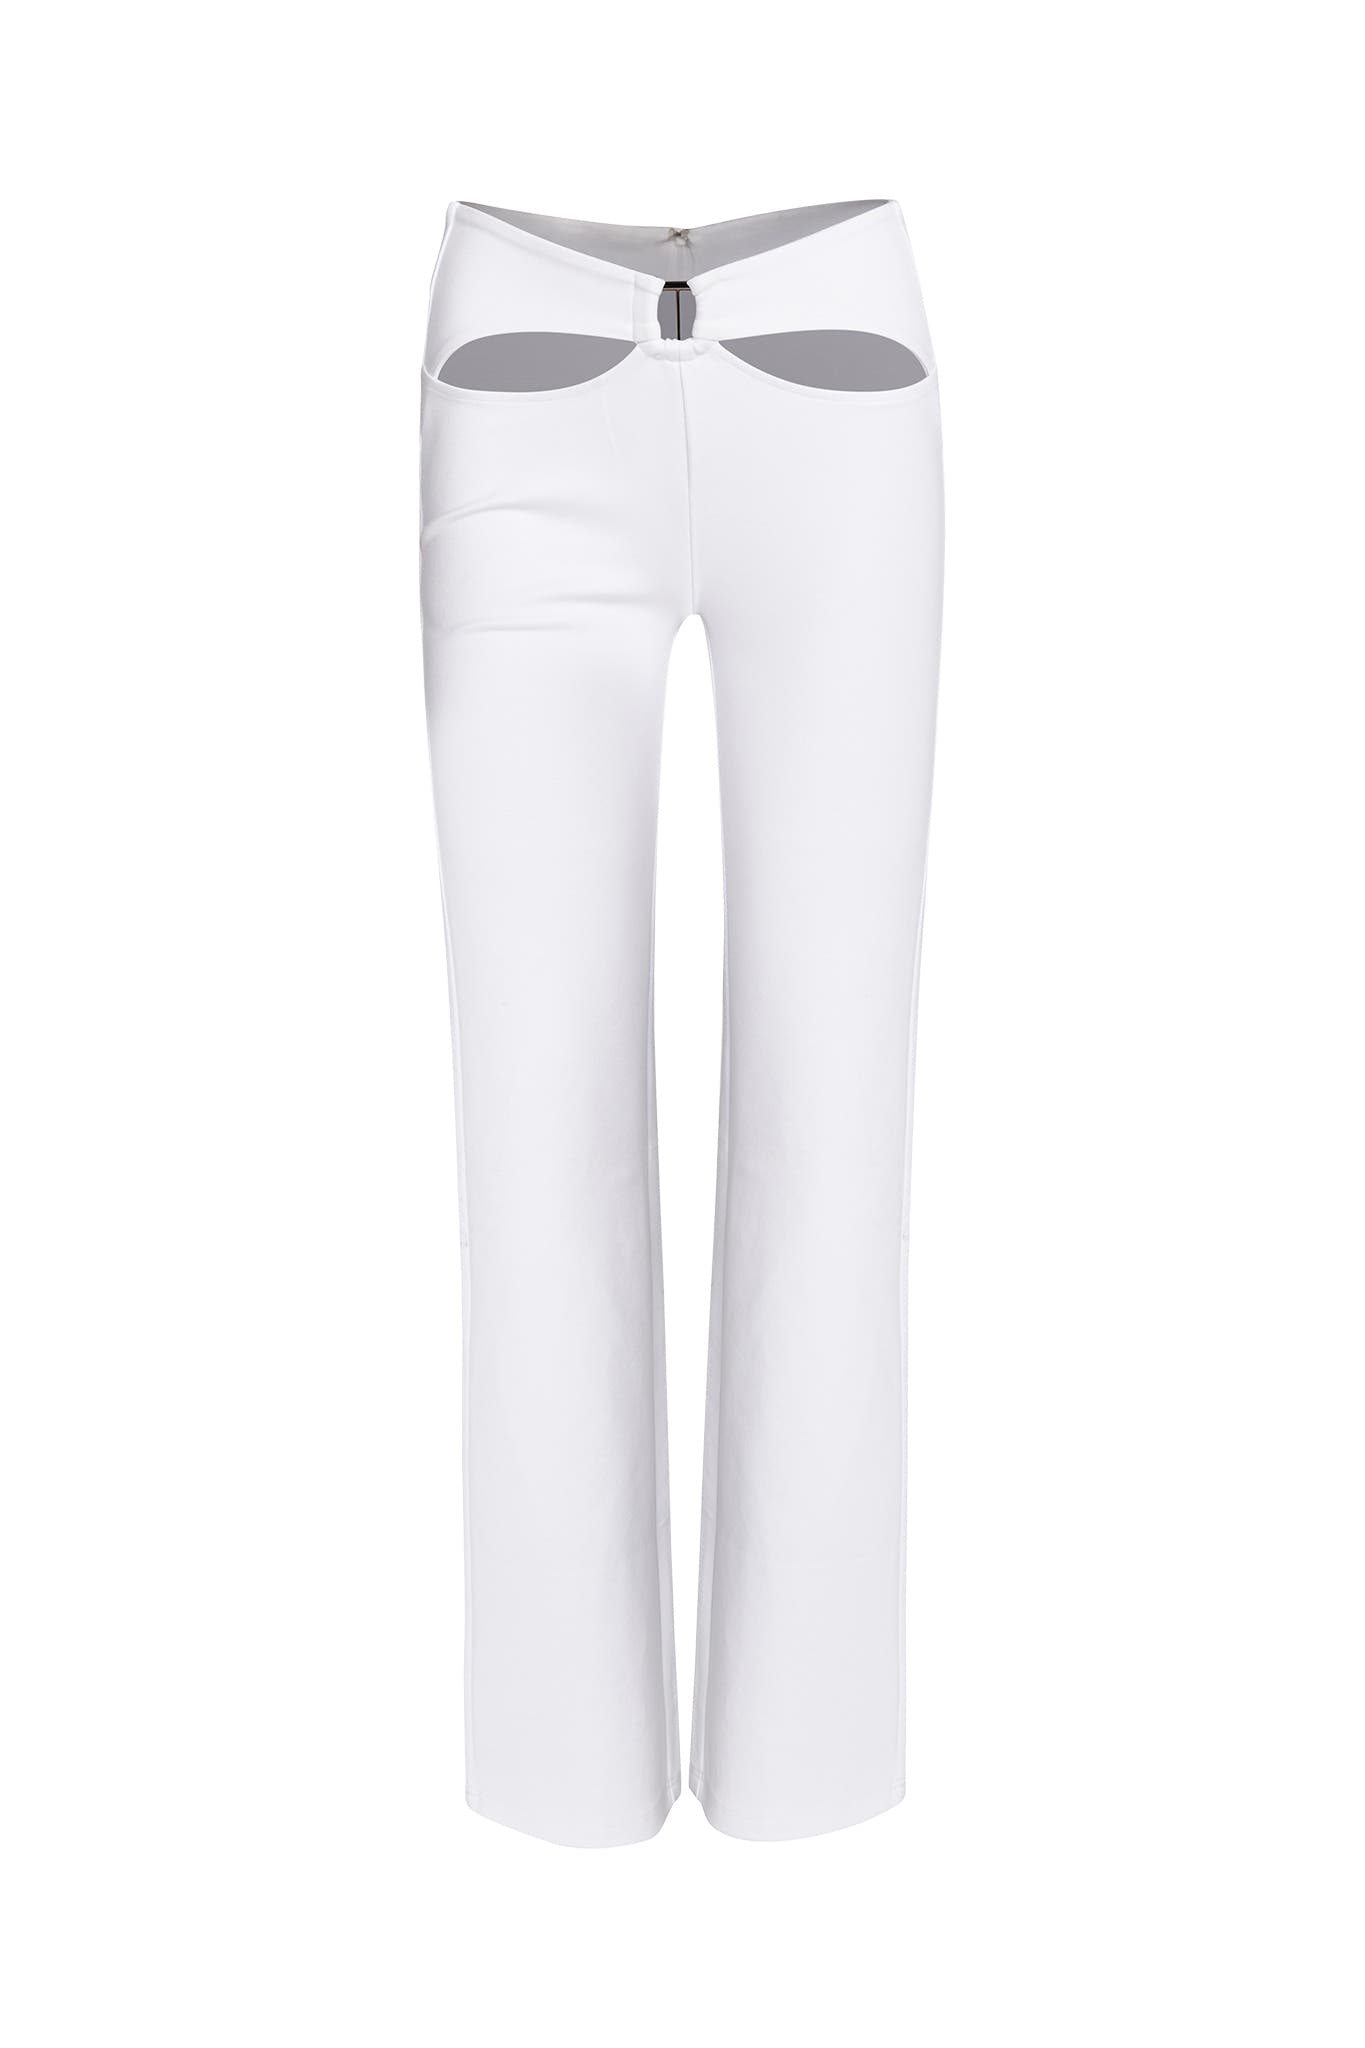 CARRIE PANT - WHITE